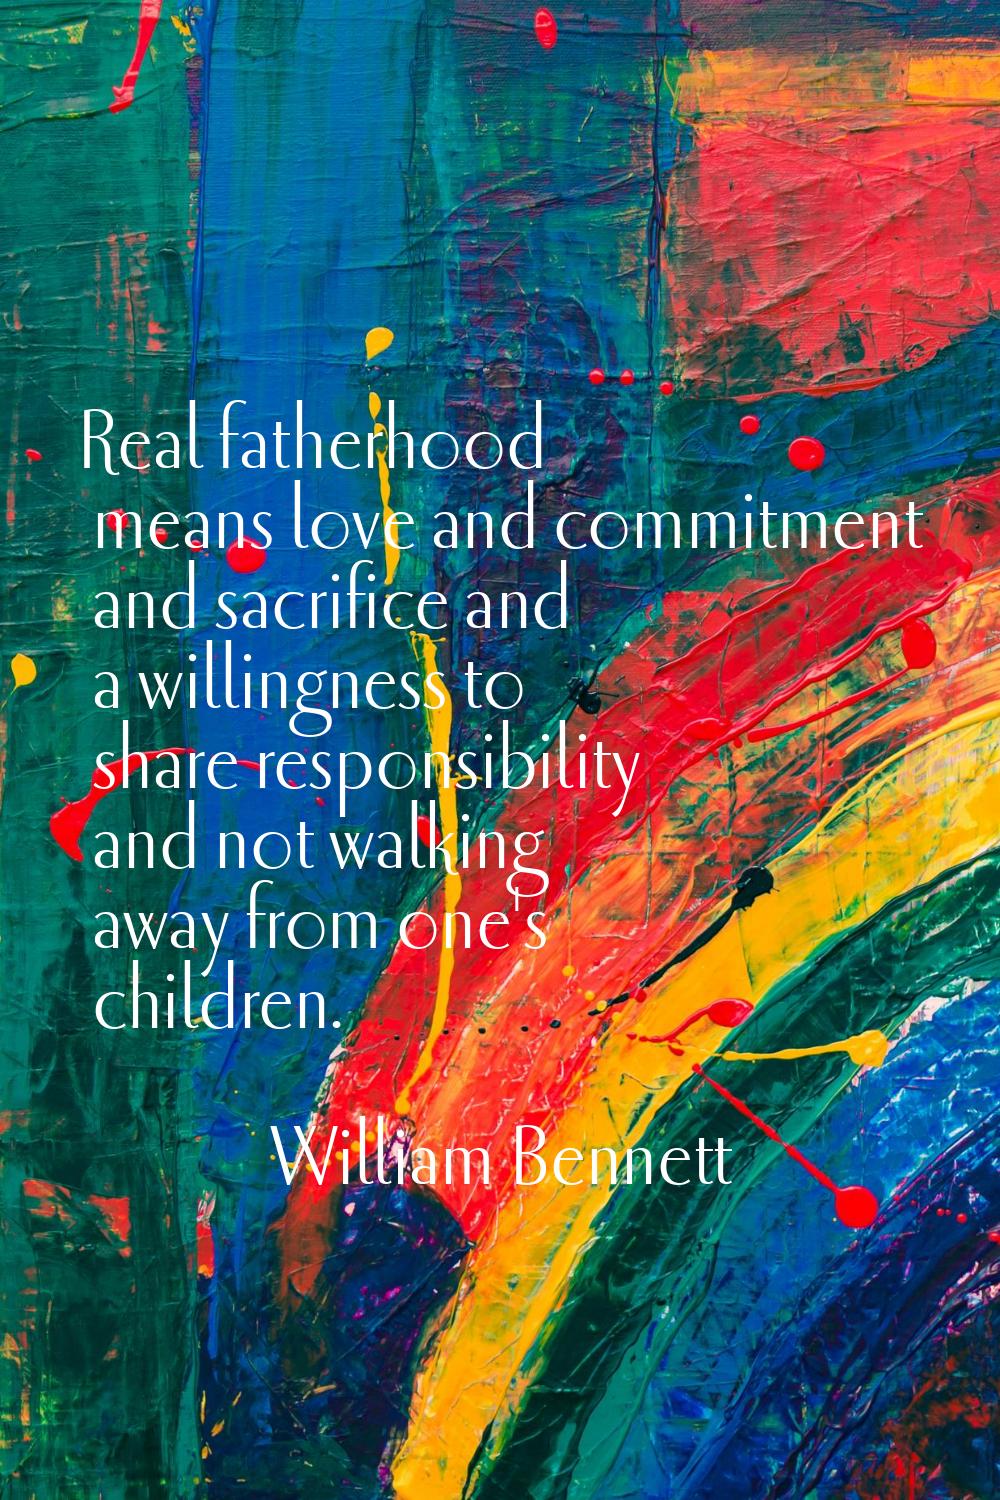 Real fatherhood means love and commitment and sacrifice and a willingness to share responsibility a